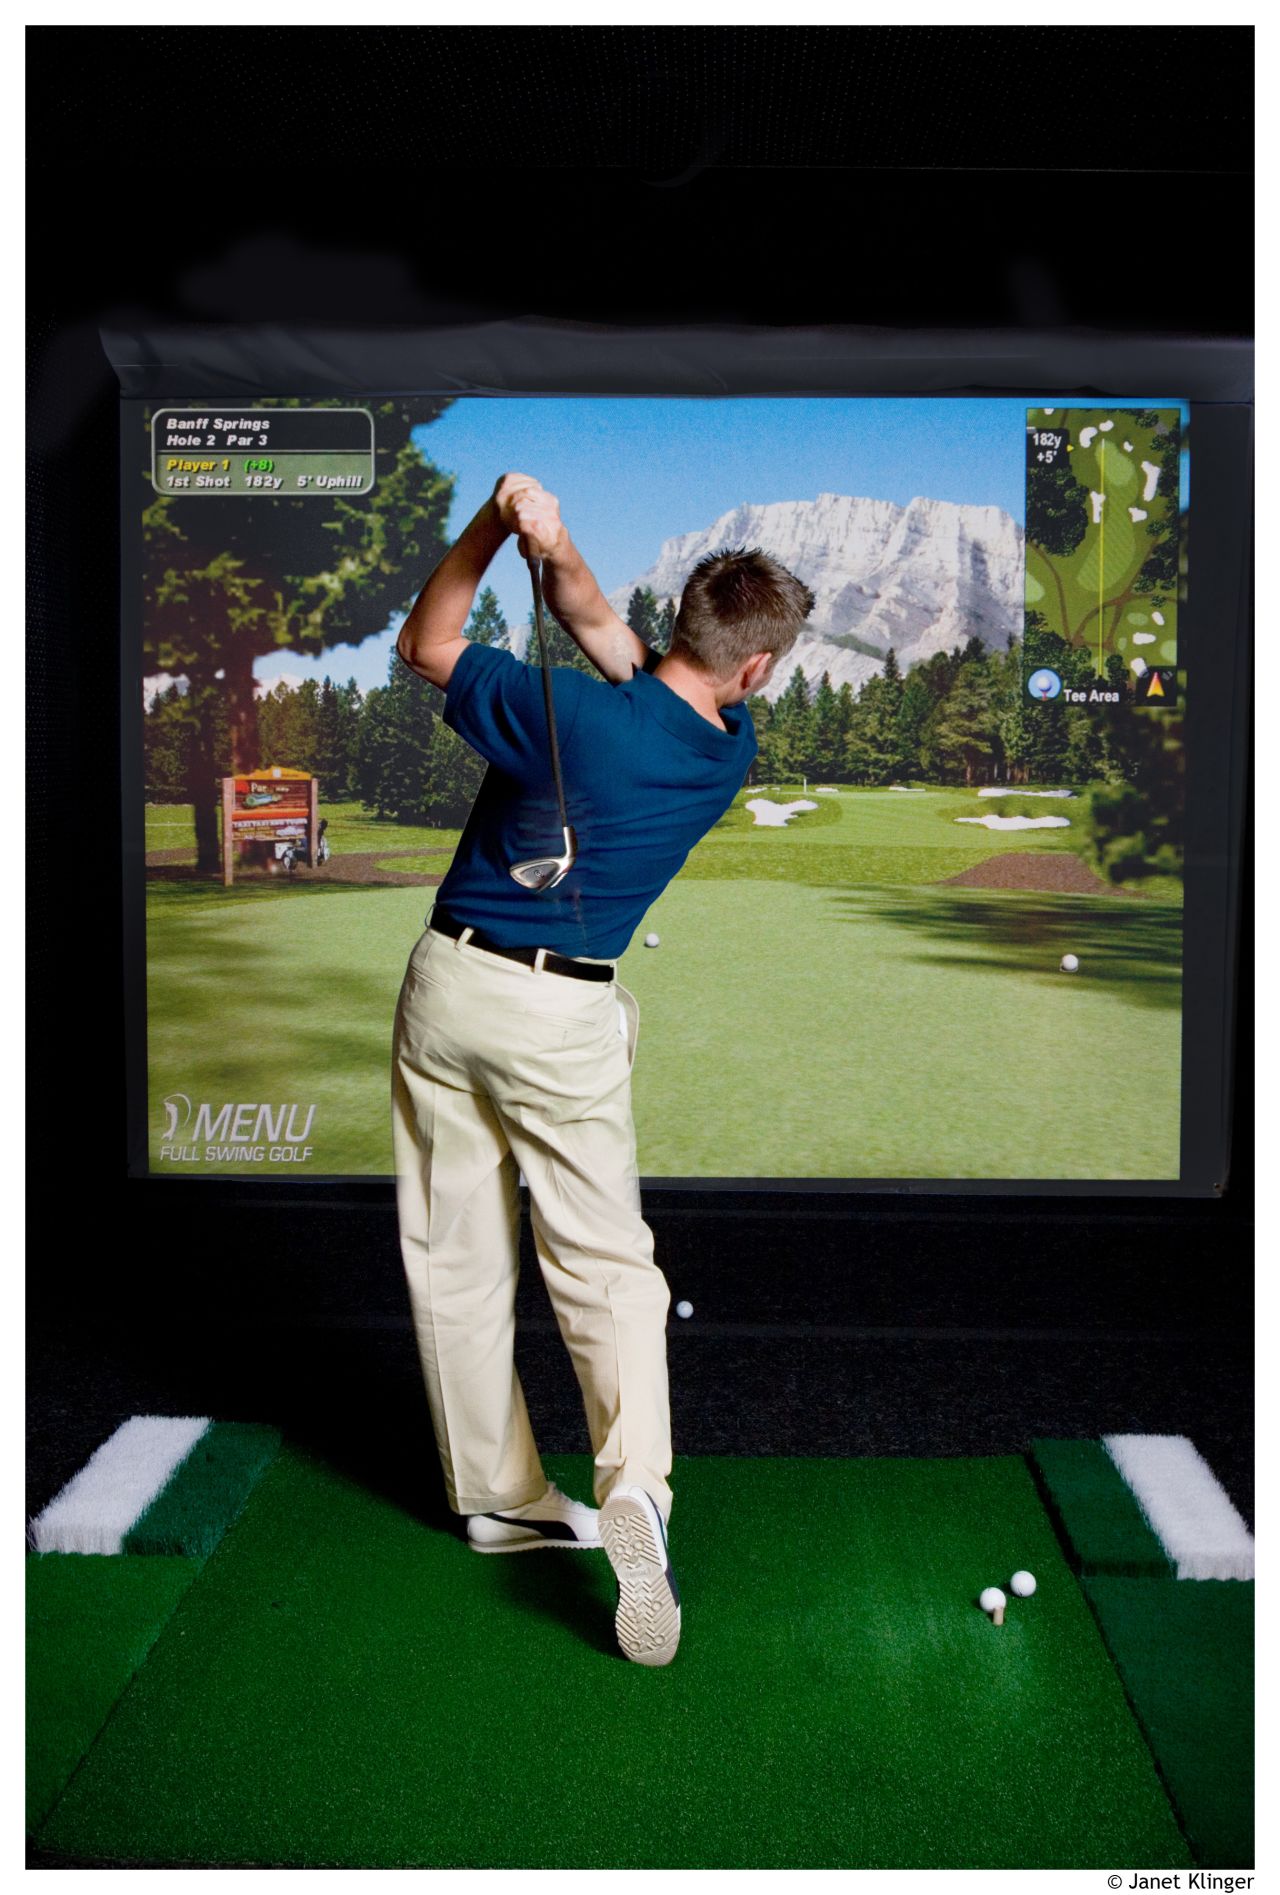 Why fly when you can play 50 international golf courses virtually?